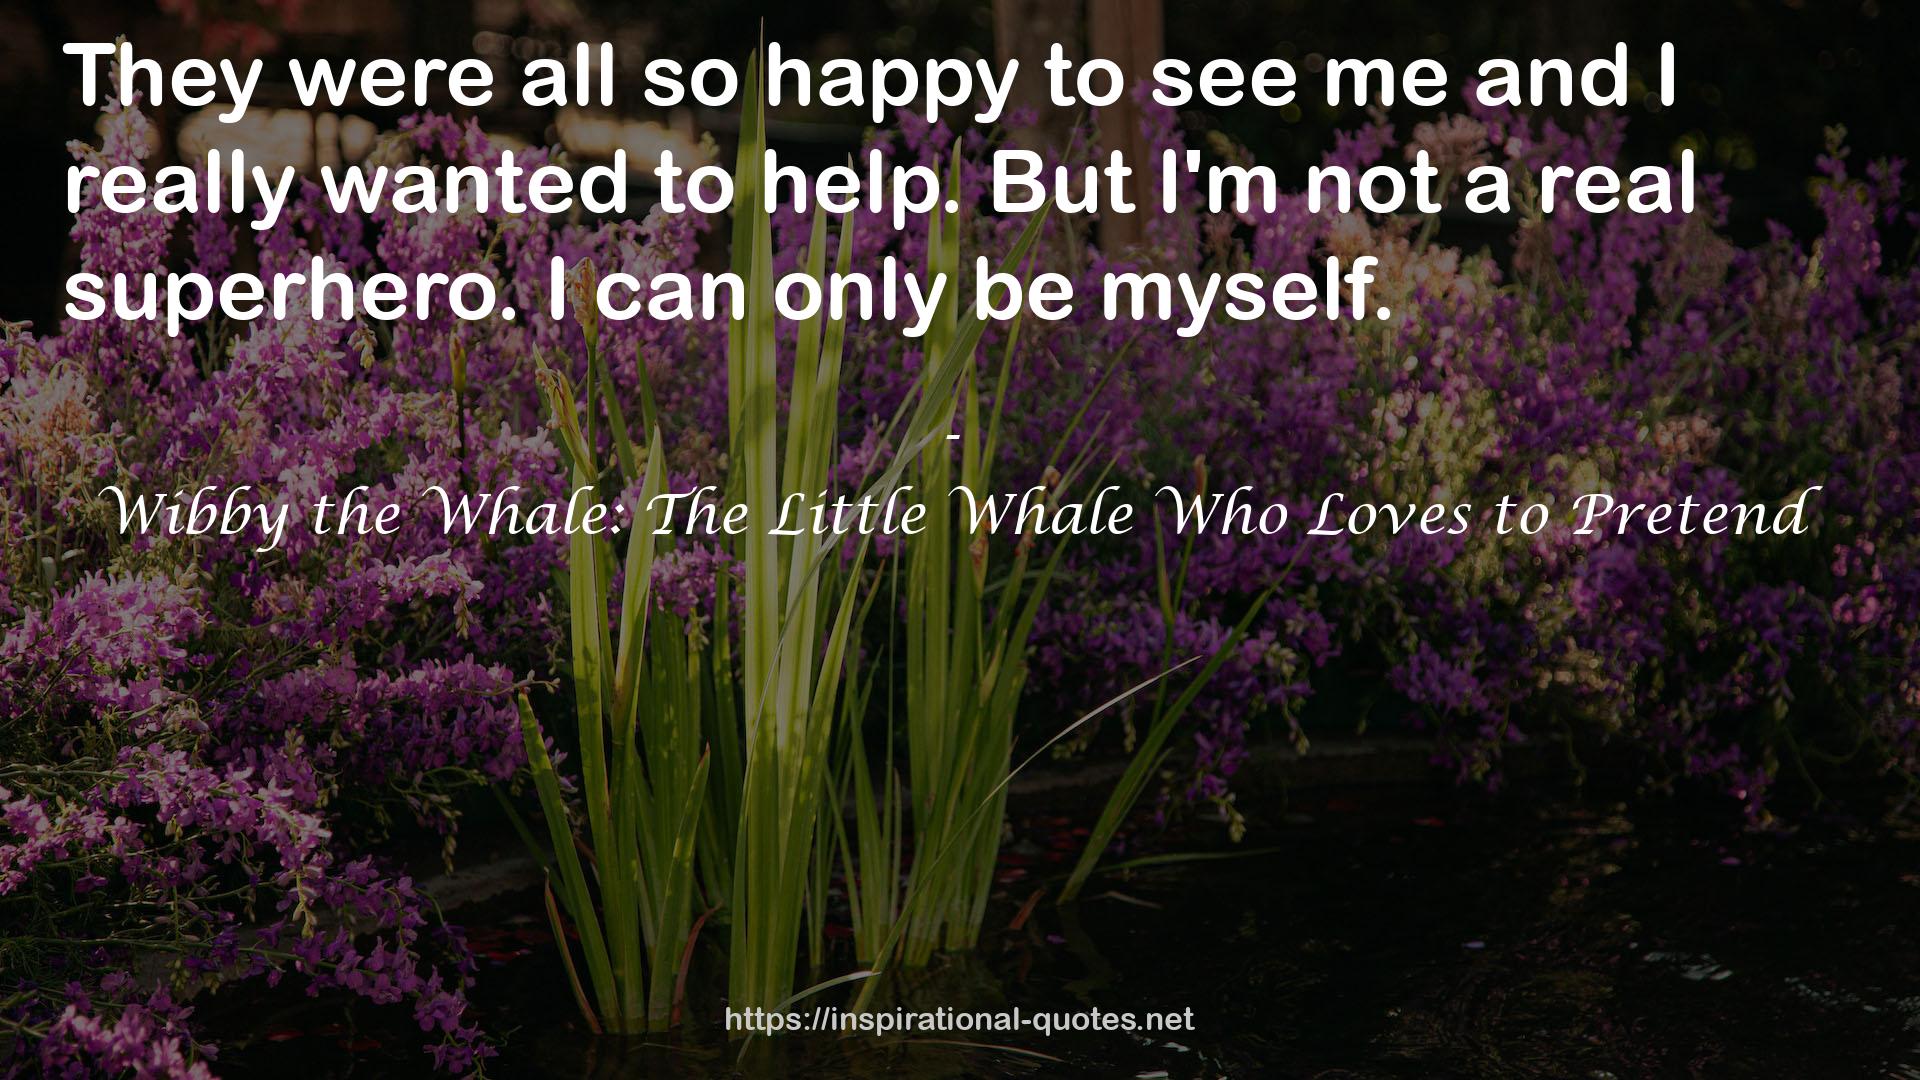 Wibby the Whale: The Little Whale Who Loves to Pretend QUOTES